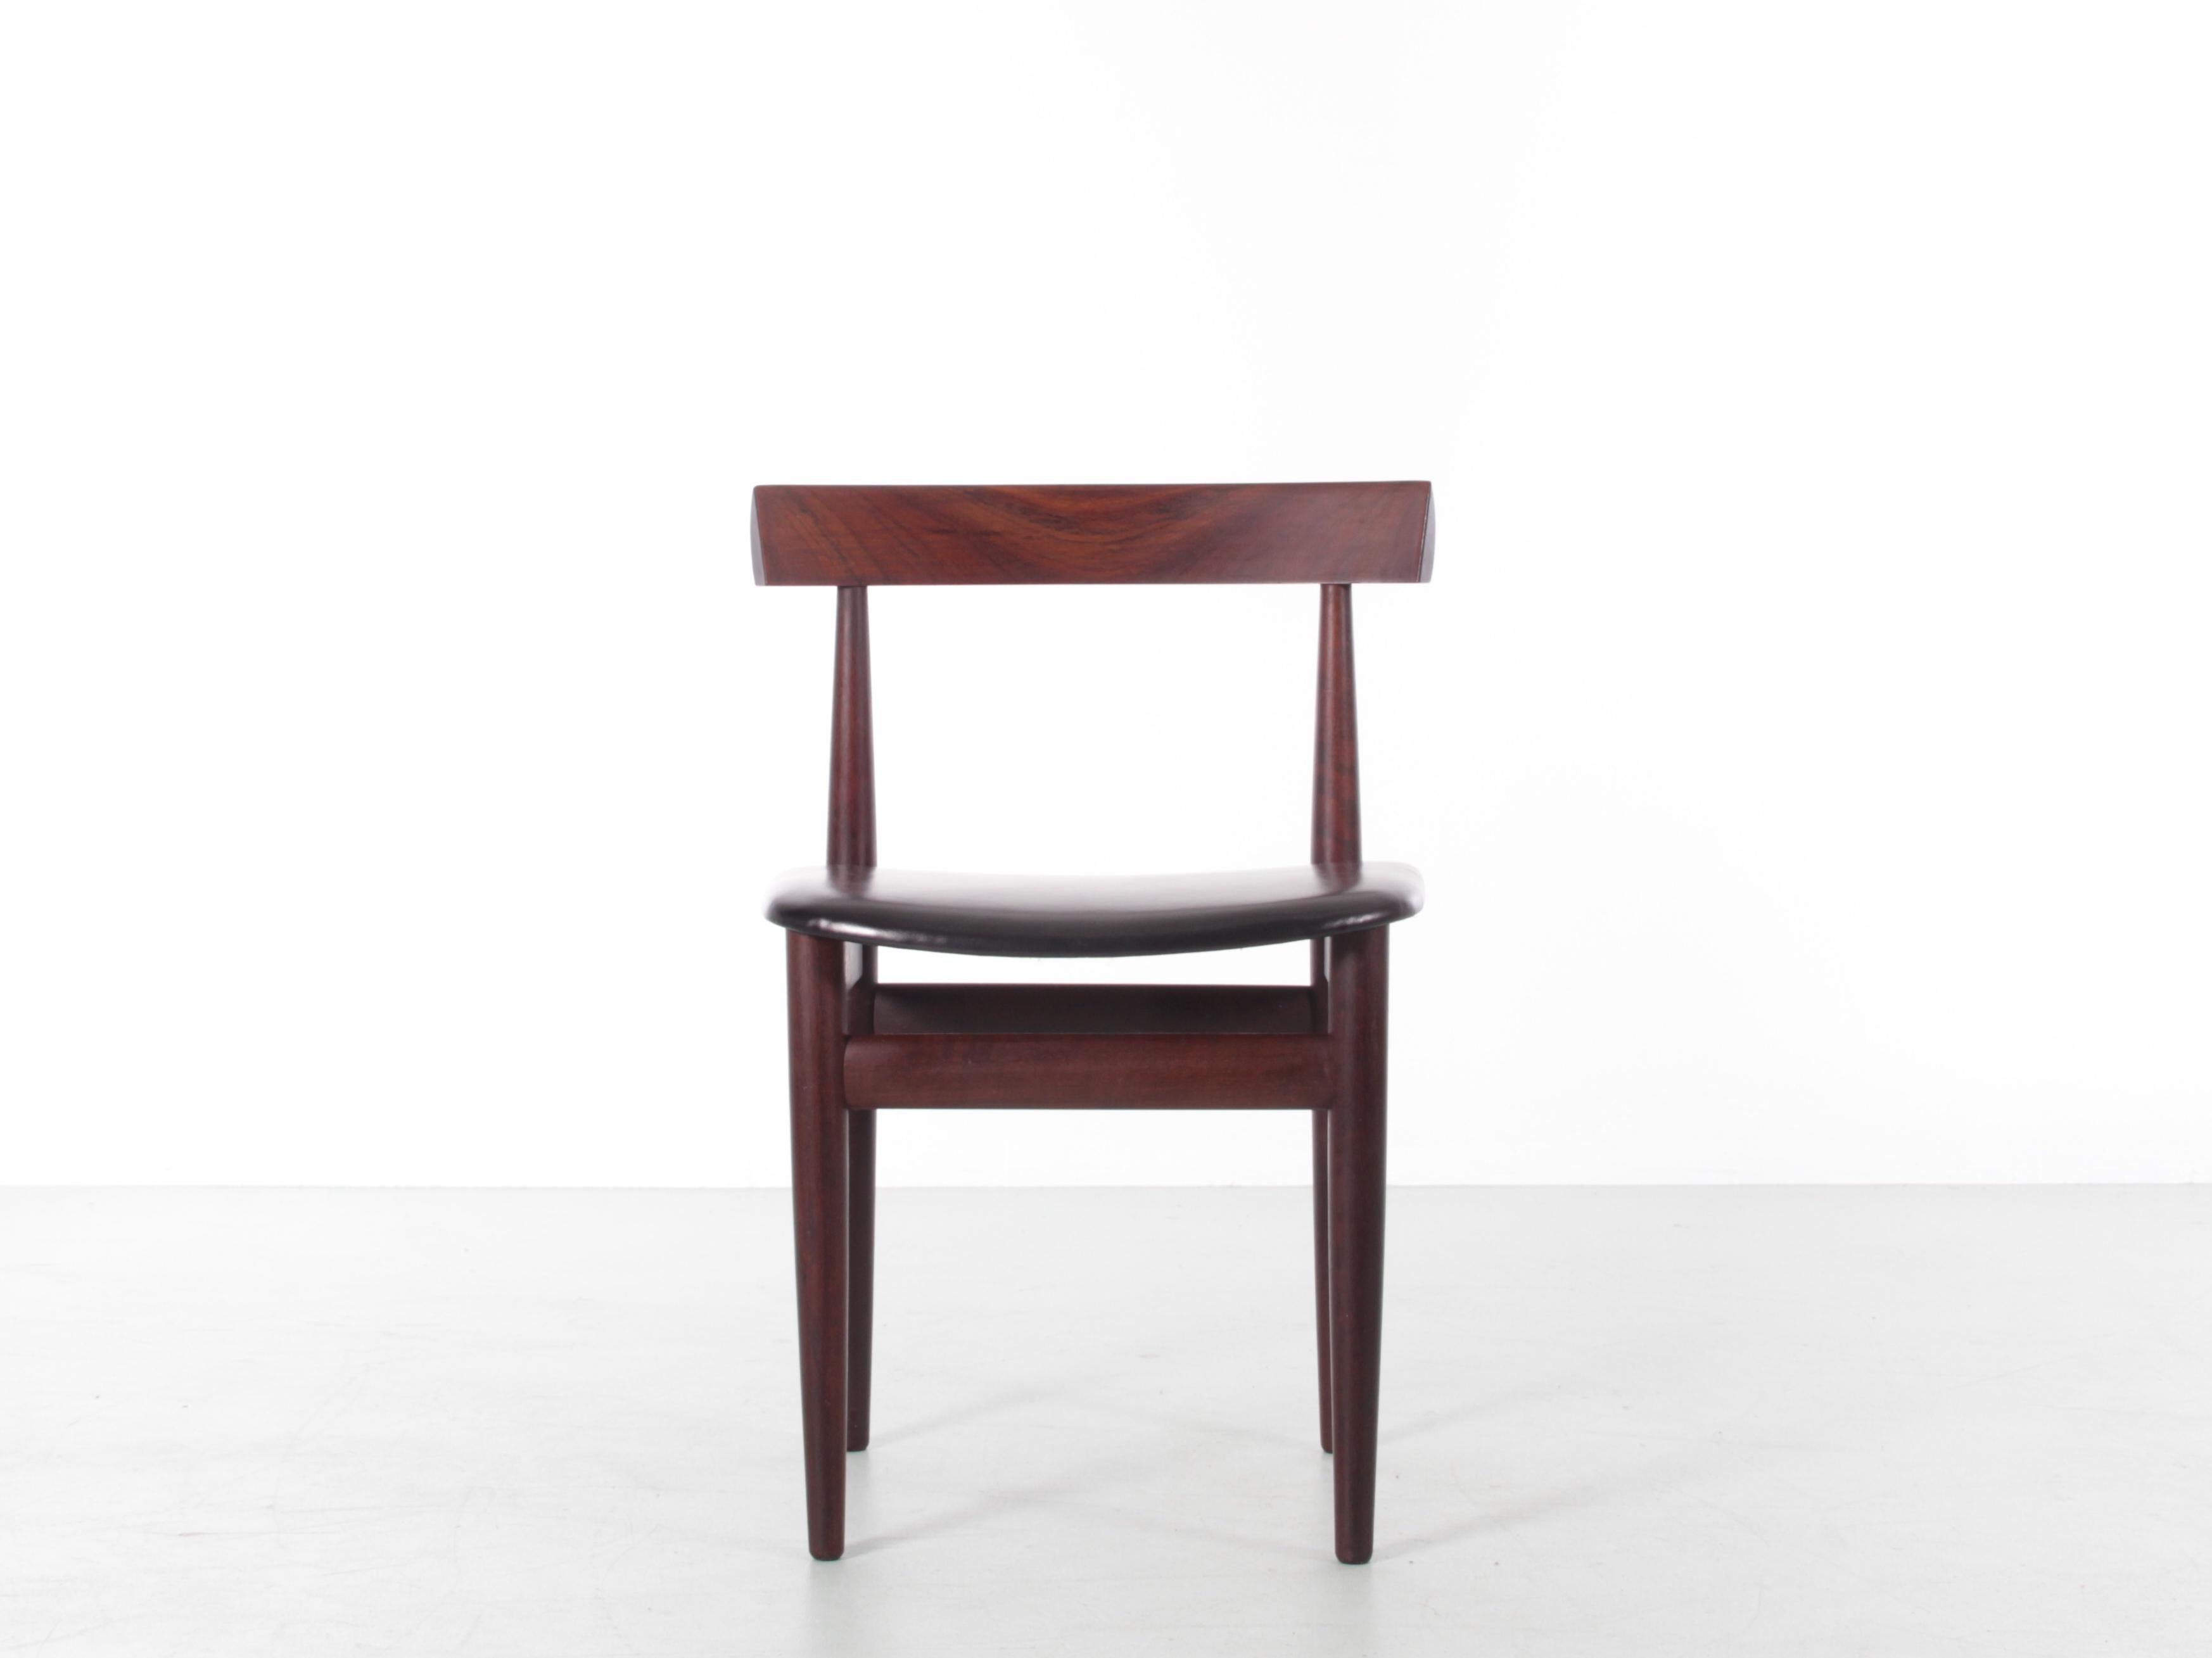 Mid-20th Century Mid-Century Modern Scandinavian Dining Set in Rosewood by Olsen with 6 Chairs